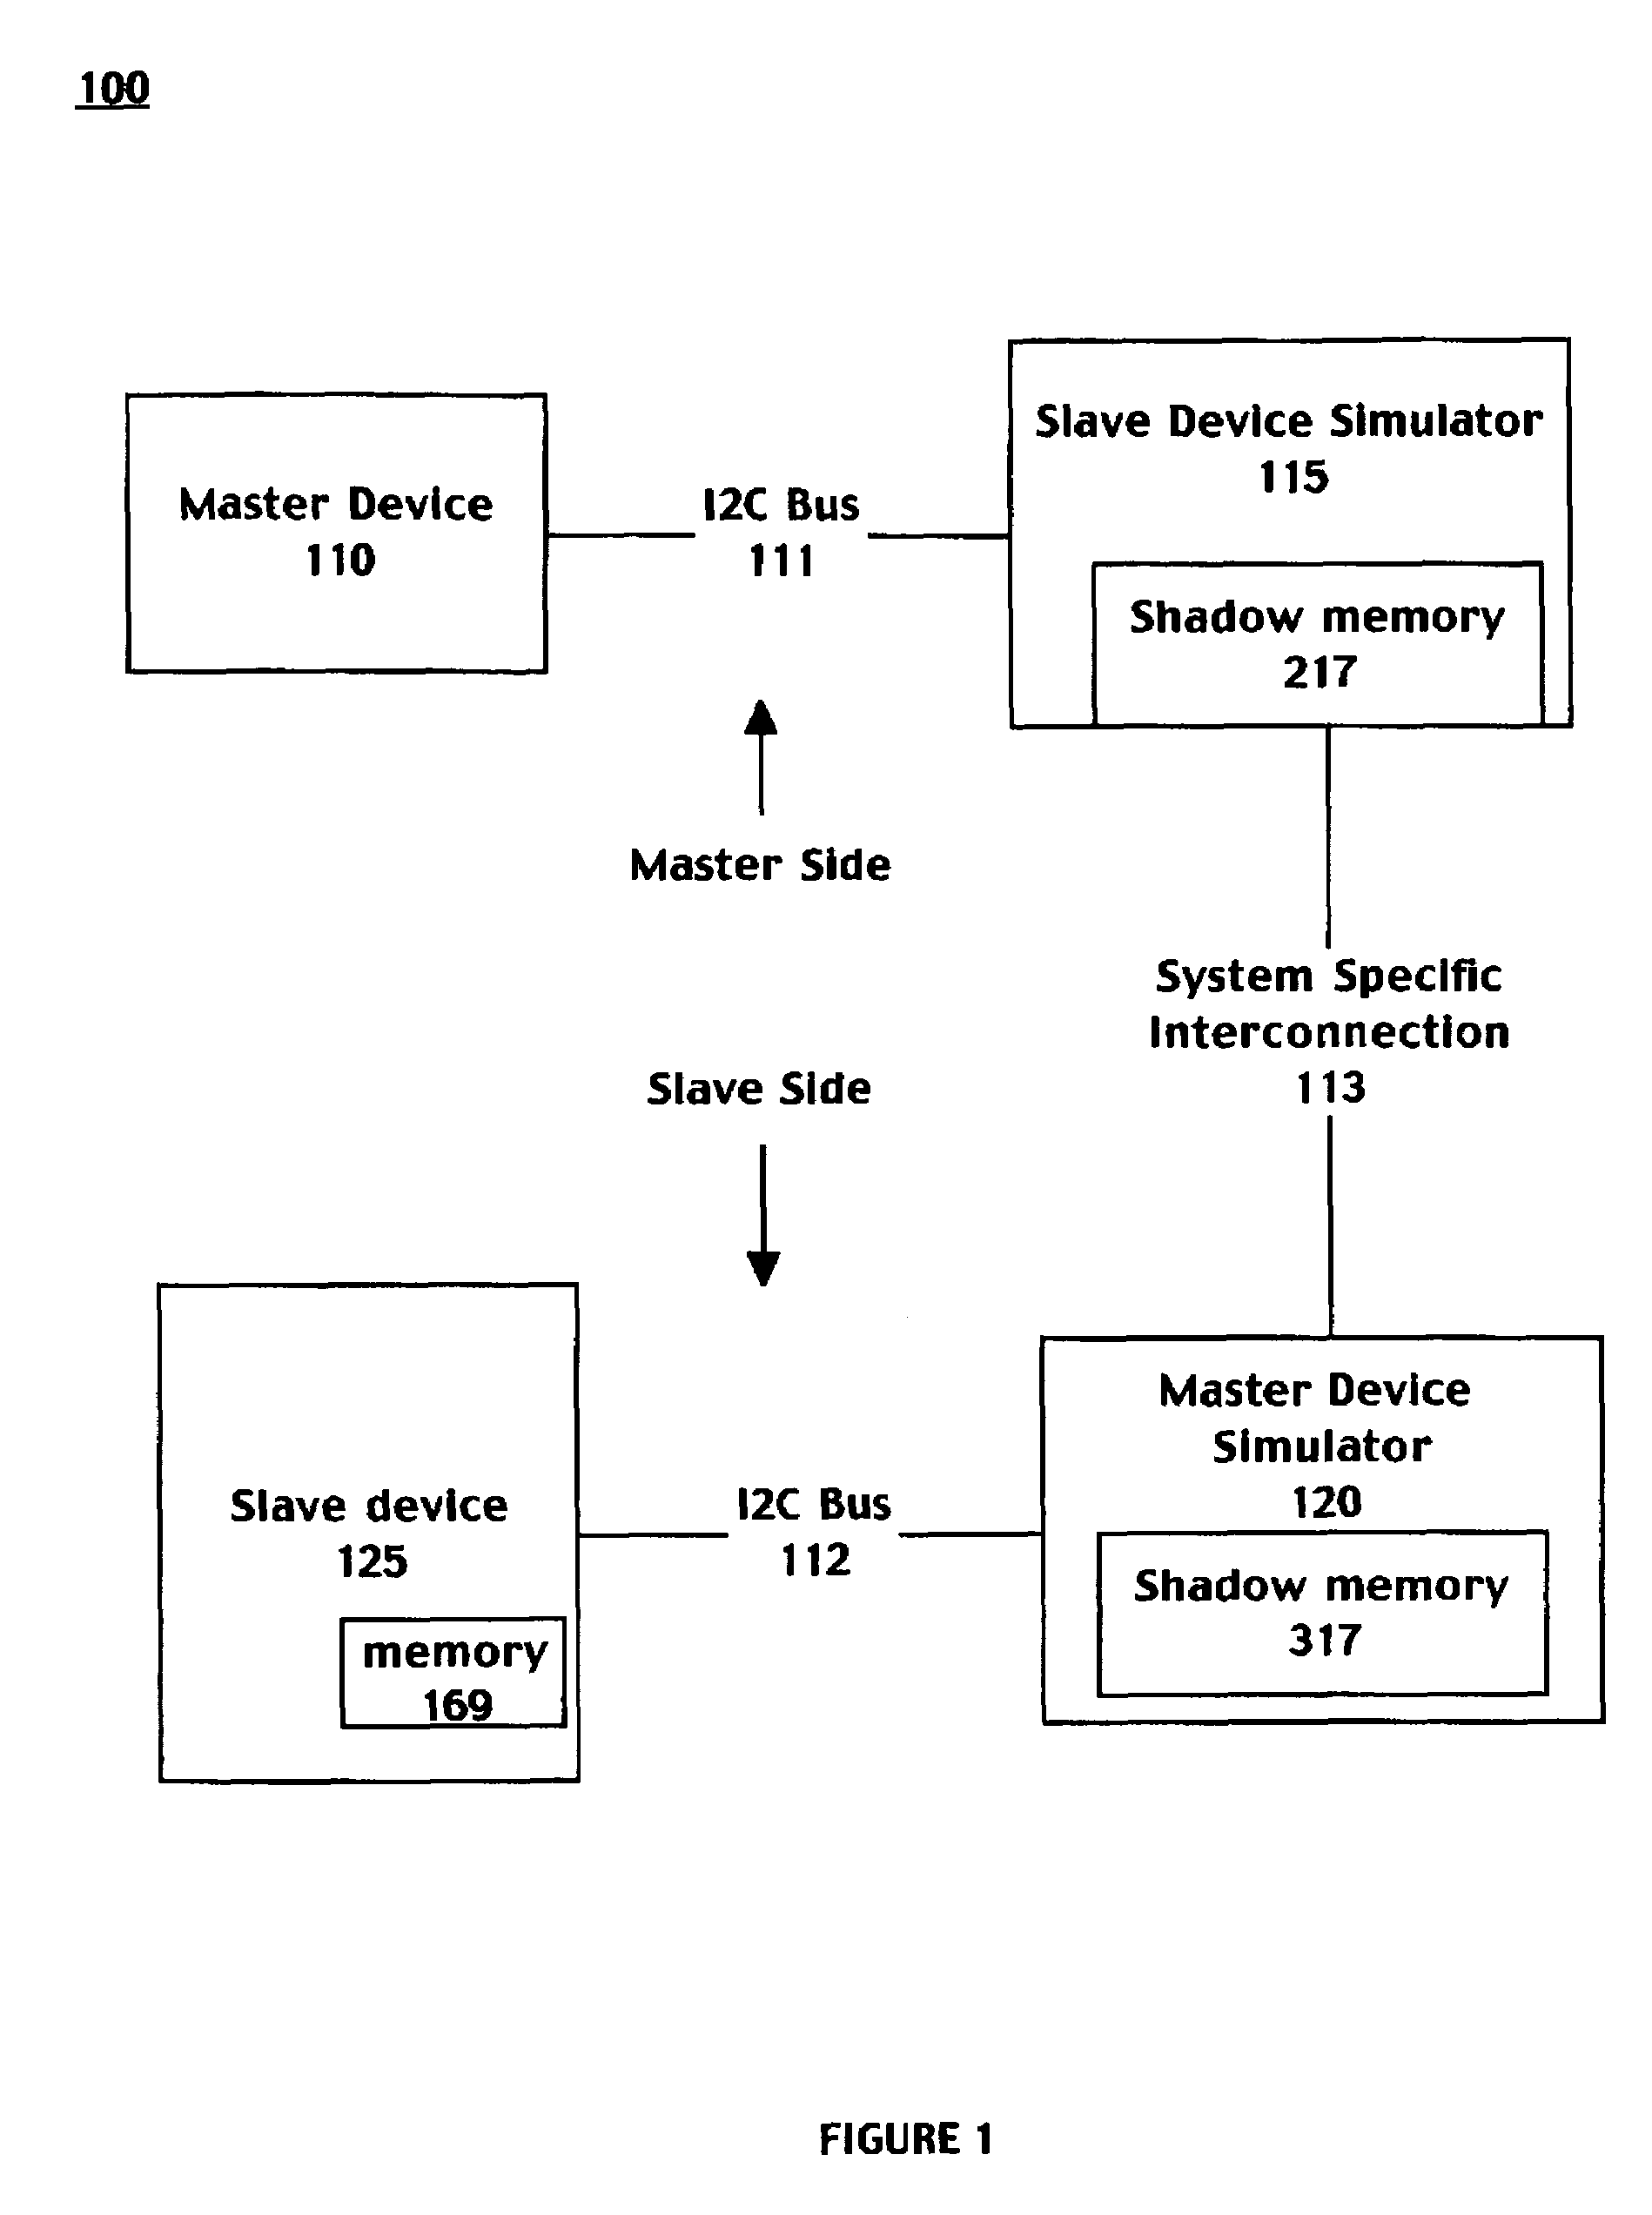 Inter integrated circuit extension via shadow memory